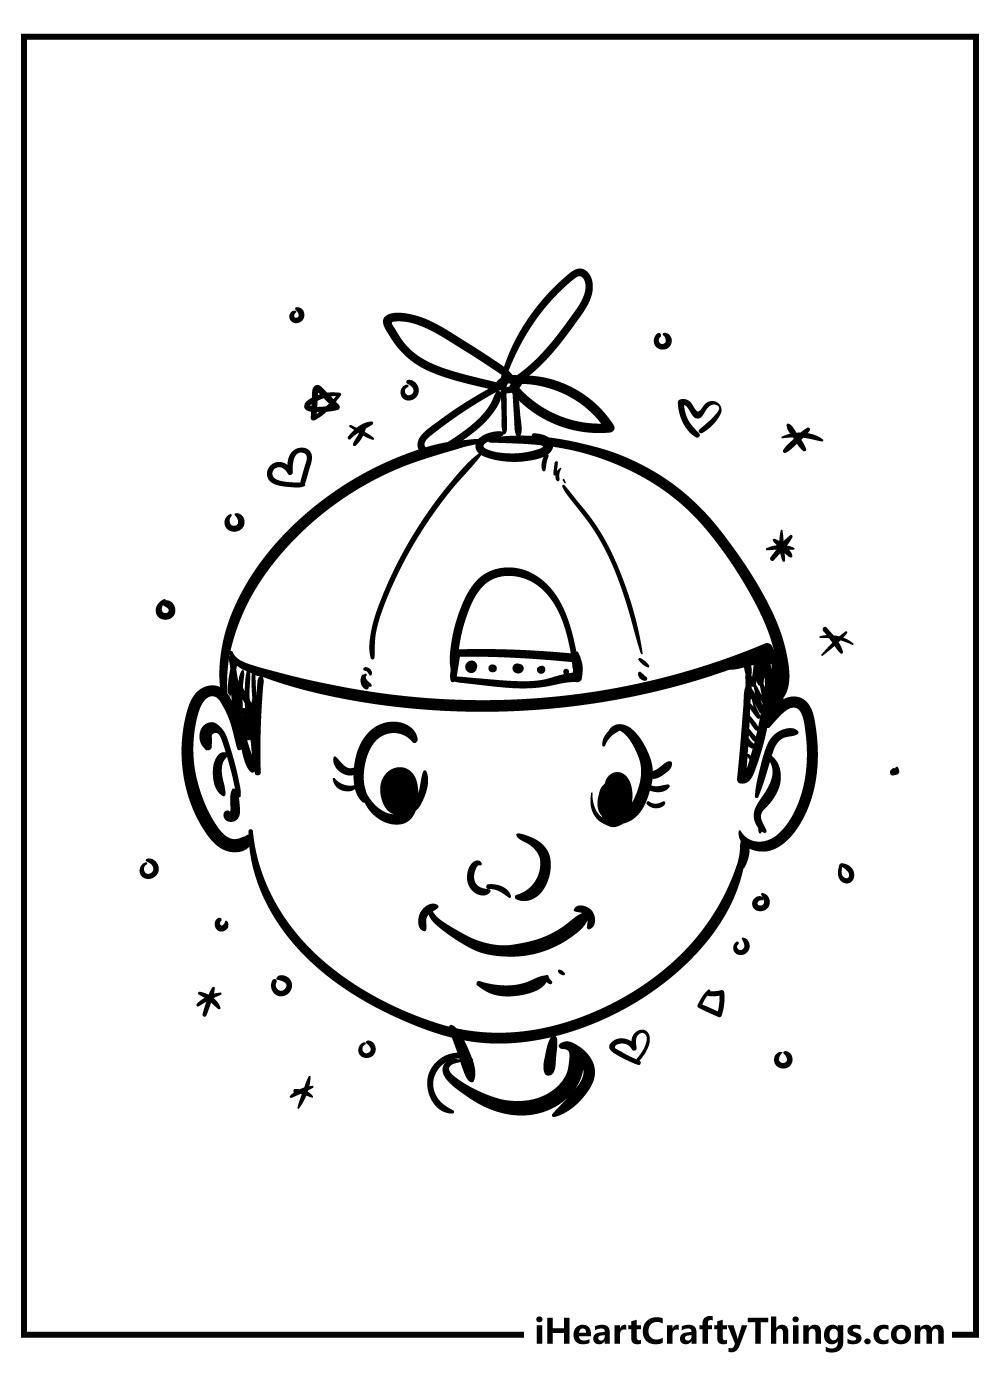 Happy Coloring Sheet for children free download